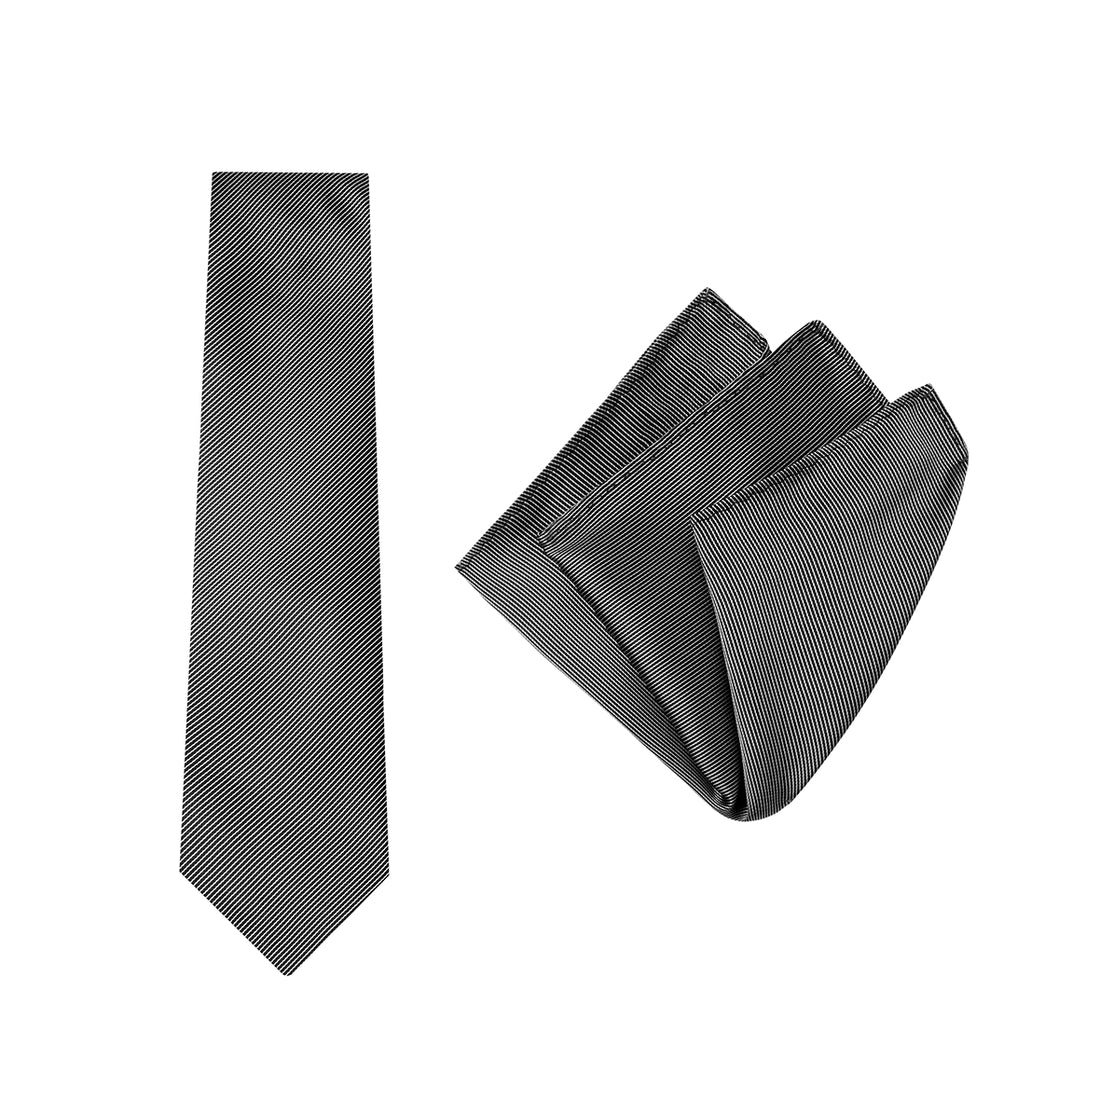 TIE + POCKET SQUARE SET. Pinstripe. Black. Supplied with matching pocket square.-Ties-PEROZ Accessories